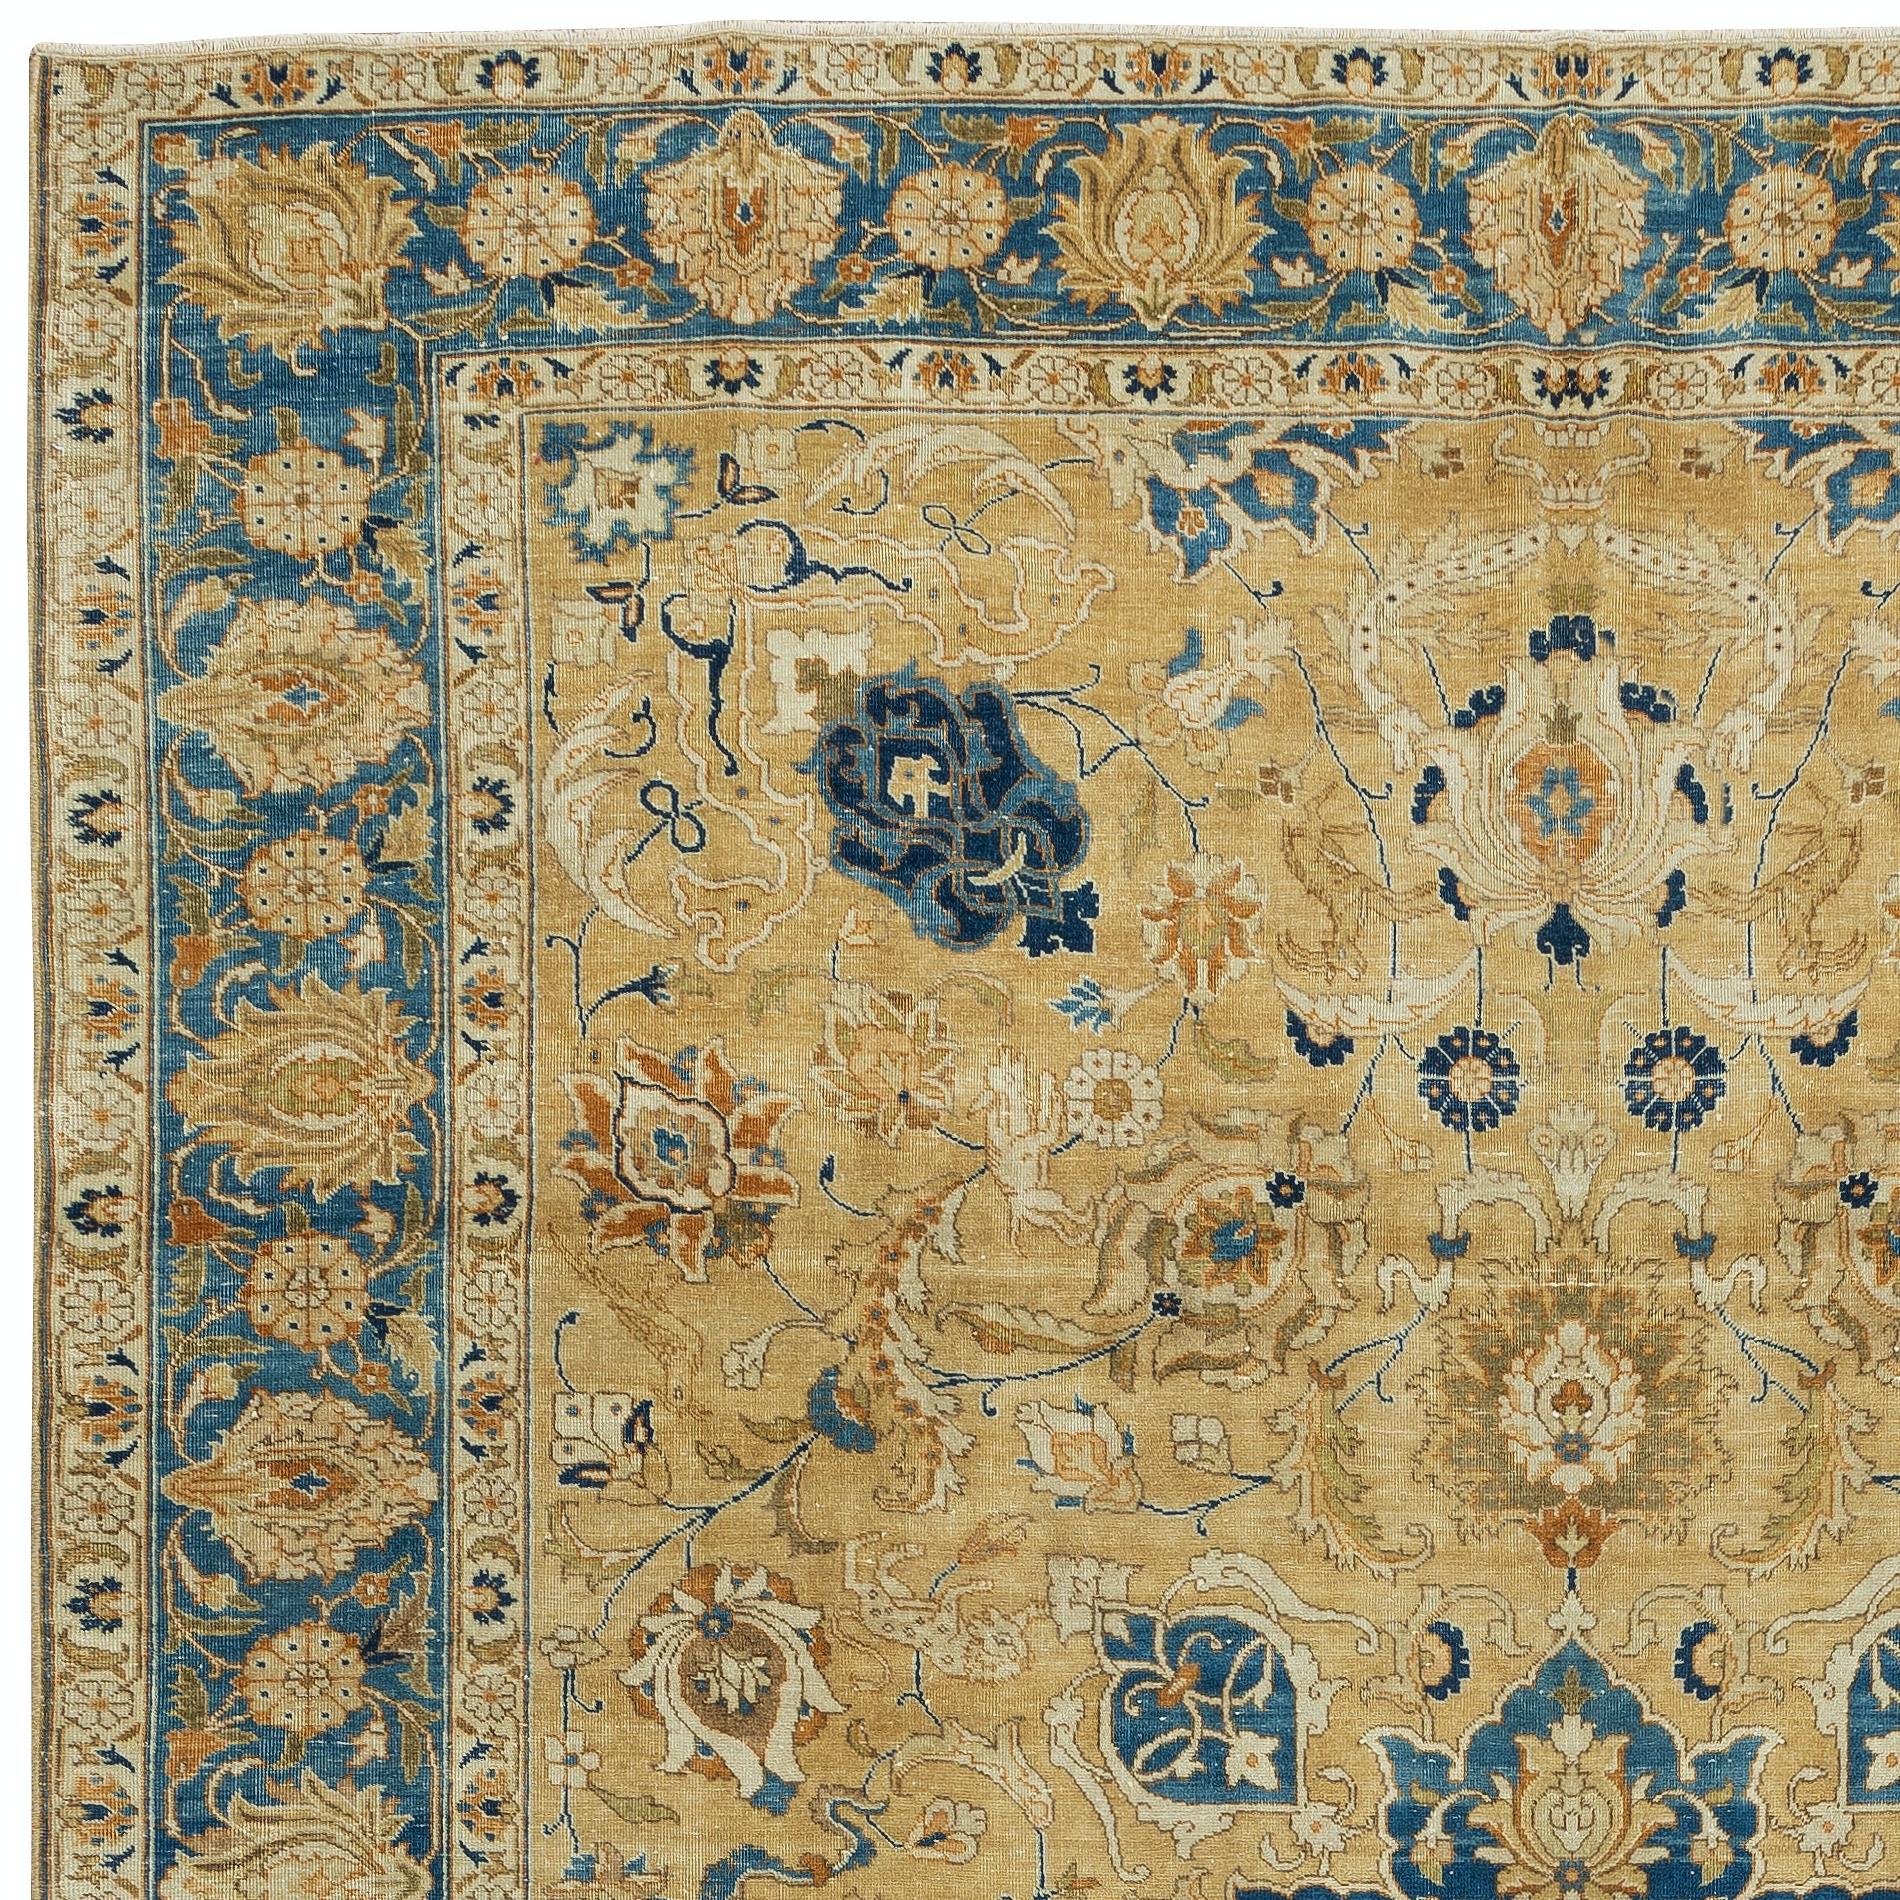 Hand-Woven 8x11 Ft Modern Handmade Area Rug in Beige & Blue, Floral Pattern Turkish Carpet For Sale